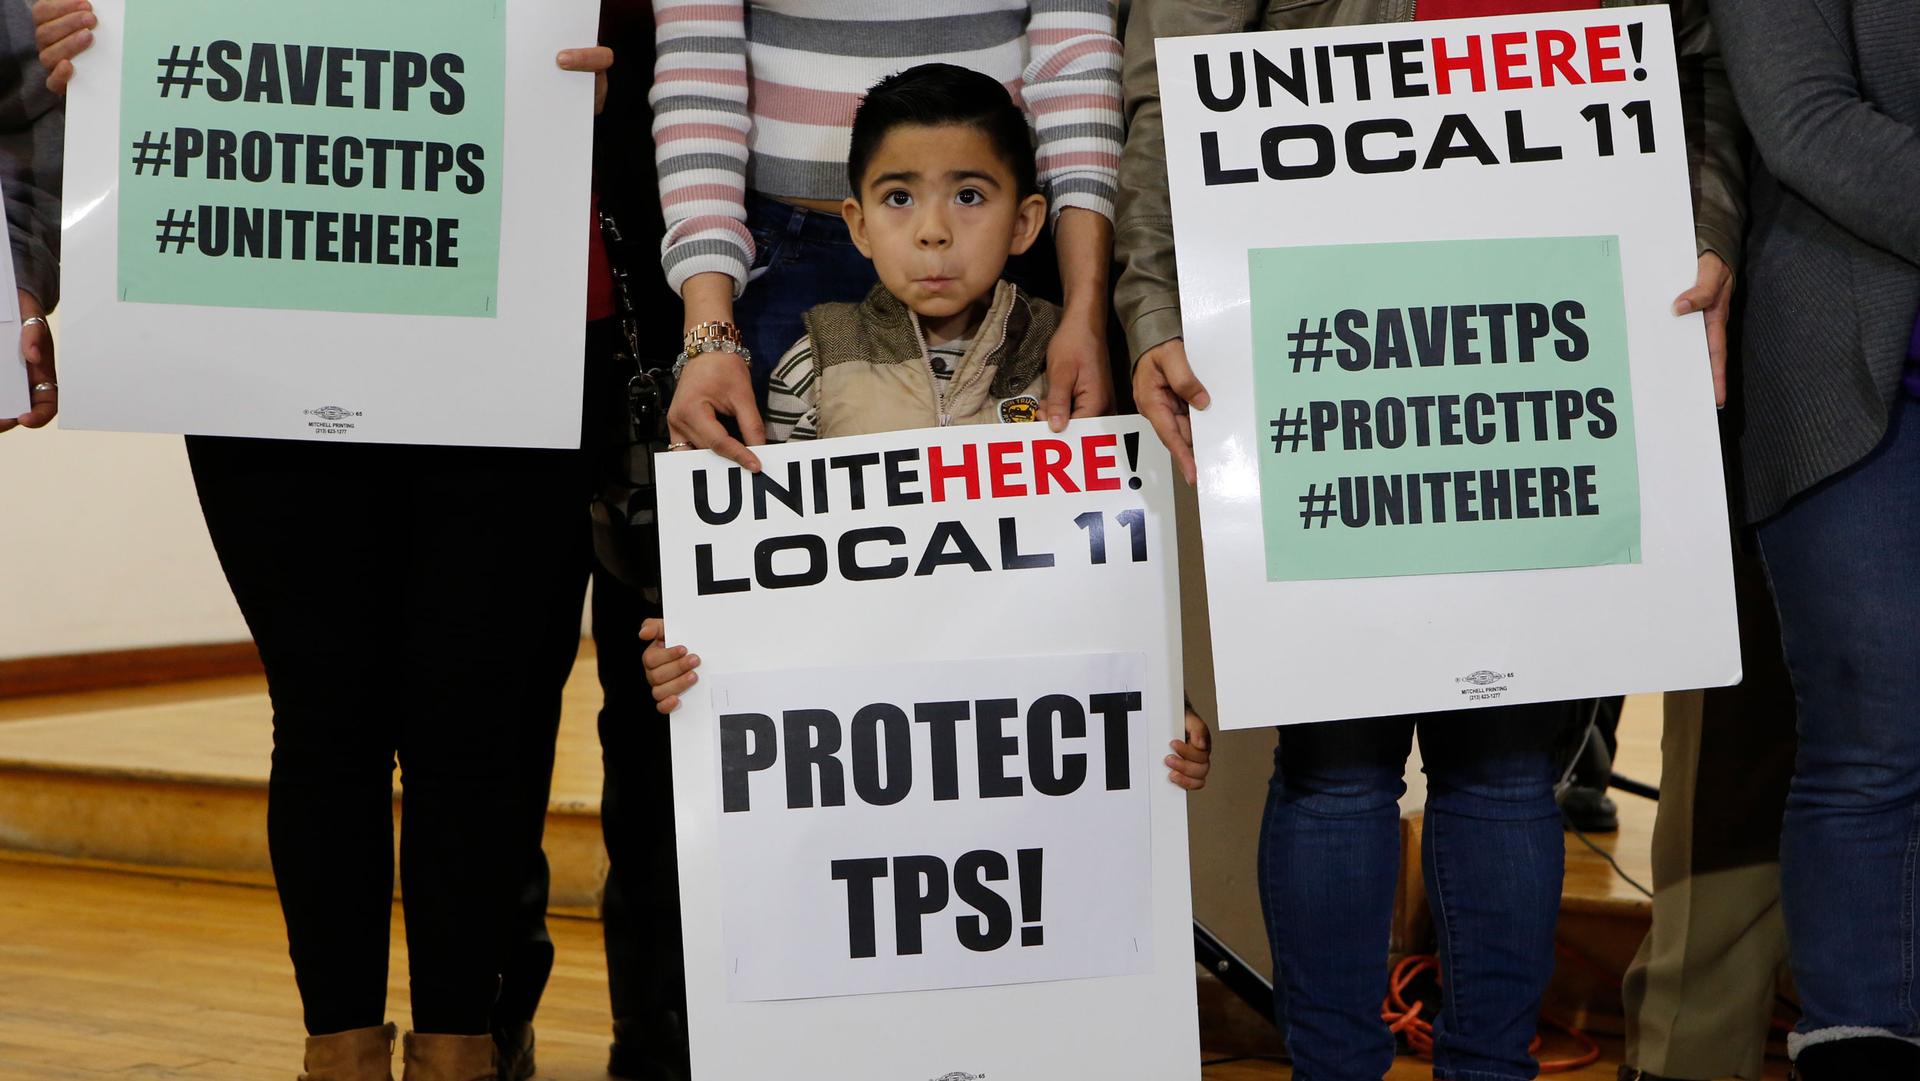 A young boy is shown holding a large white sign that says, "Unite here! Local 11, Protect TPS!" on it.